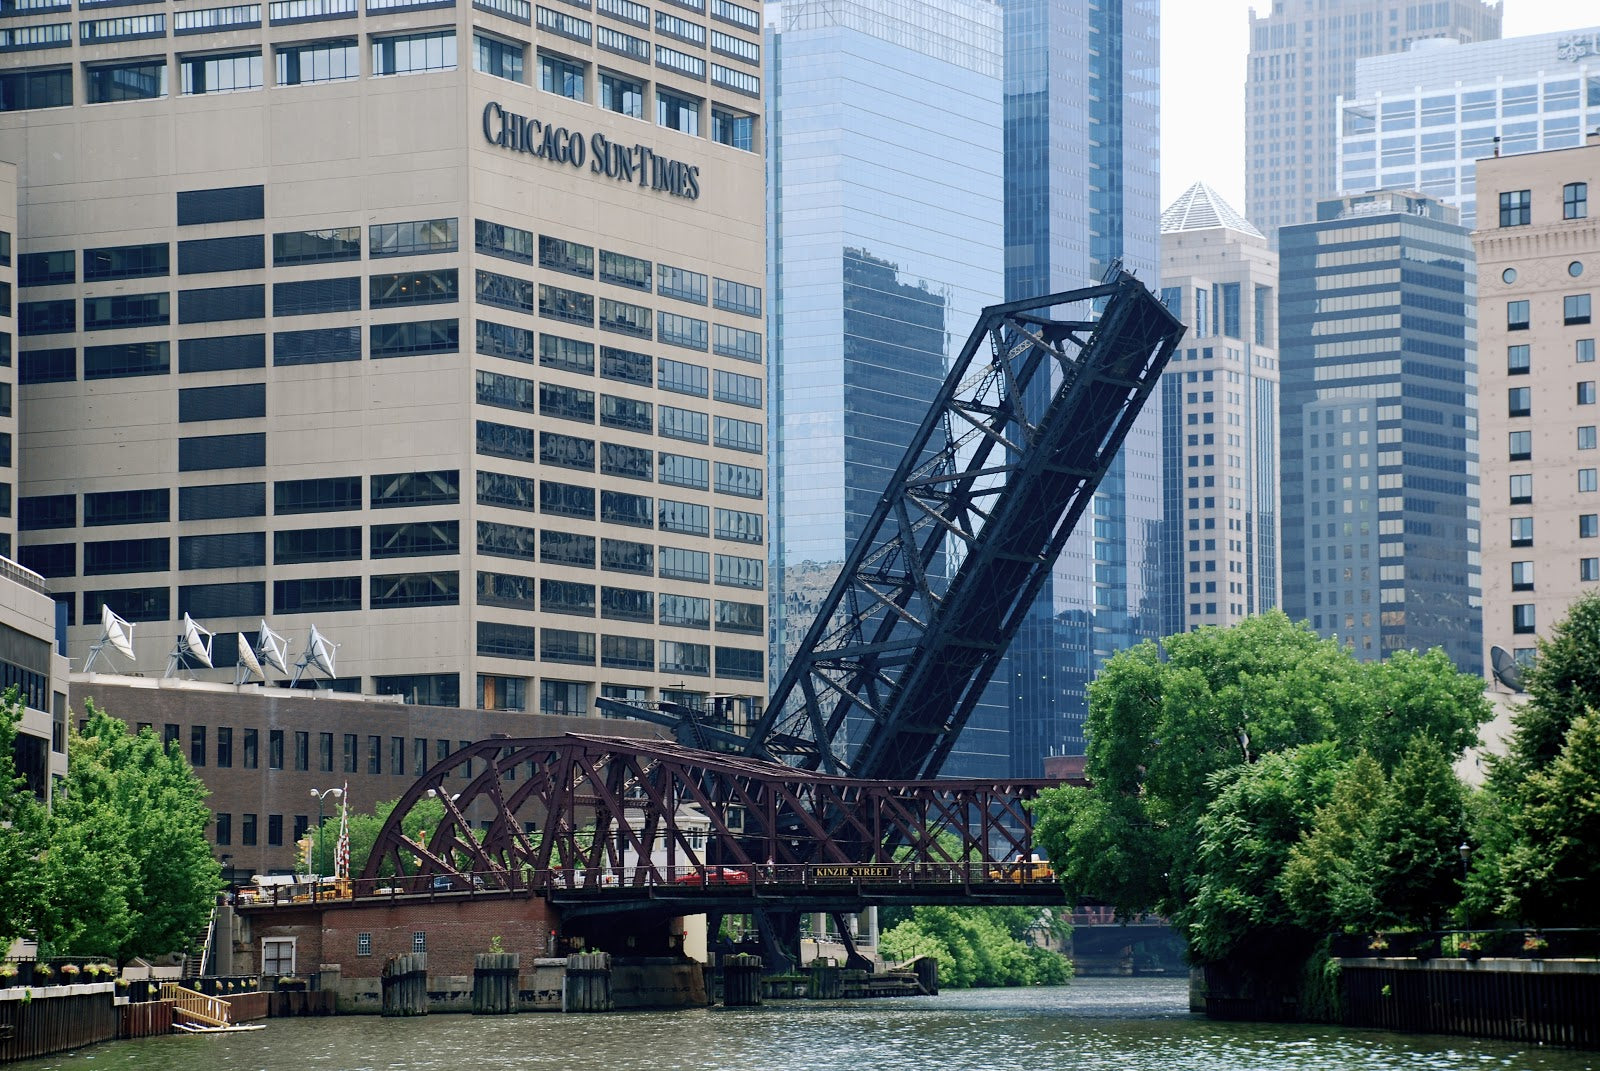 New Design Inspired by the Chicago River